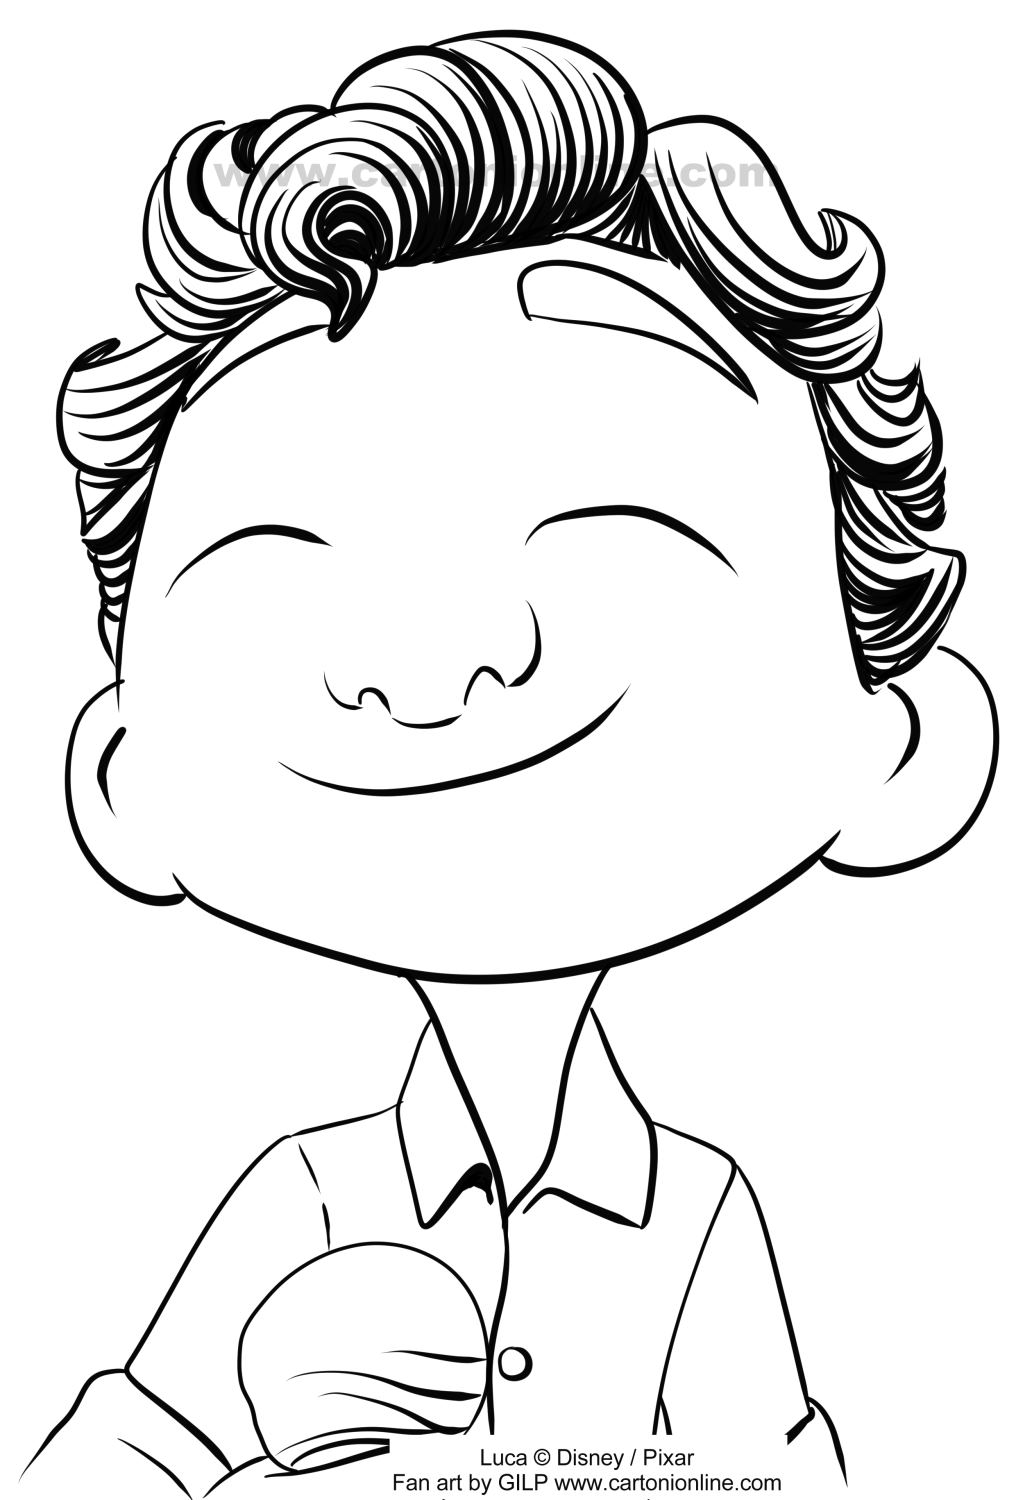 Luca Paguro von Luca (Disney/Pixar) coloring page to print and coloring